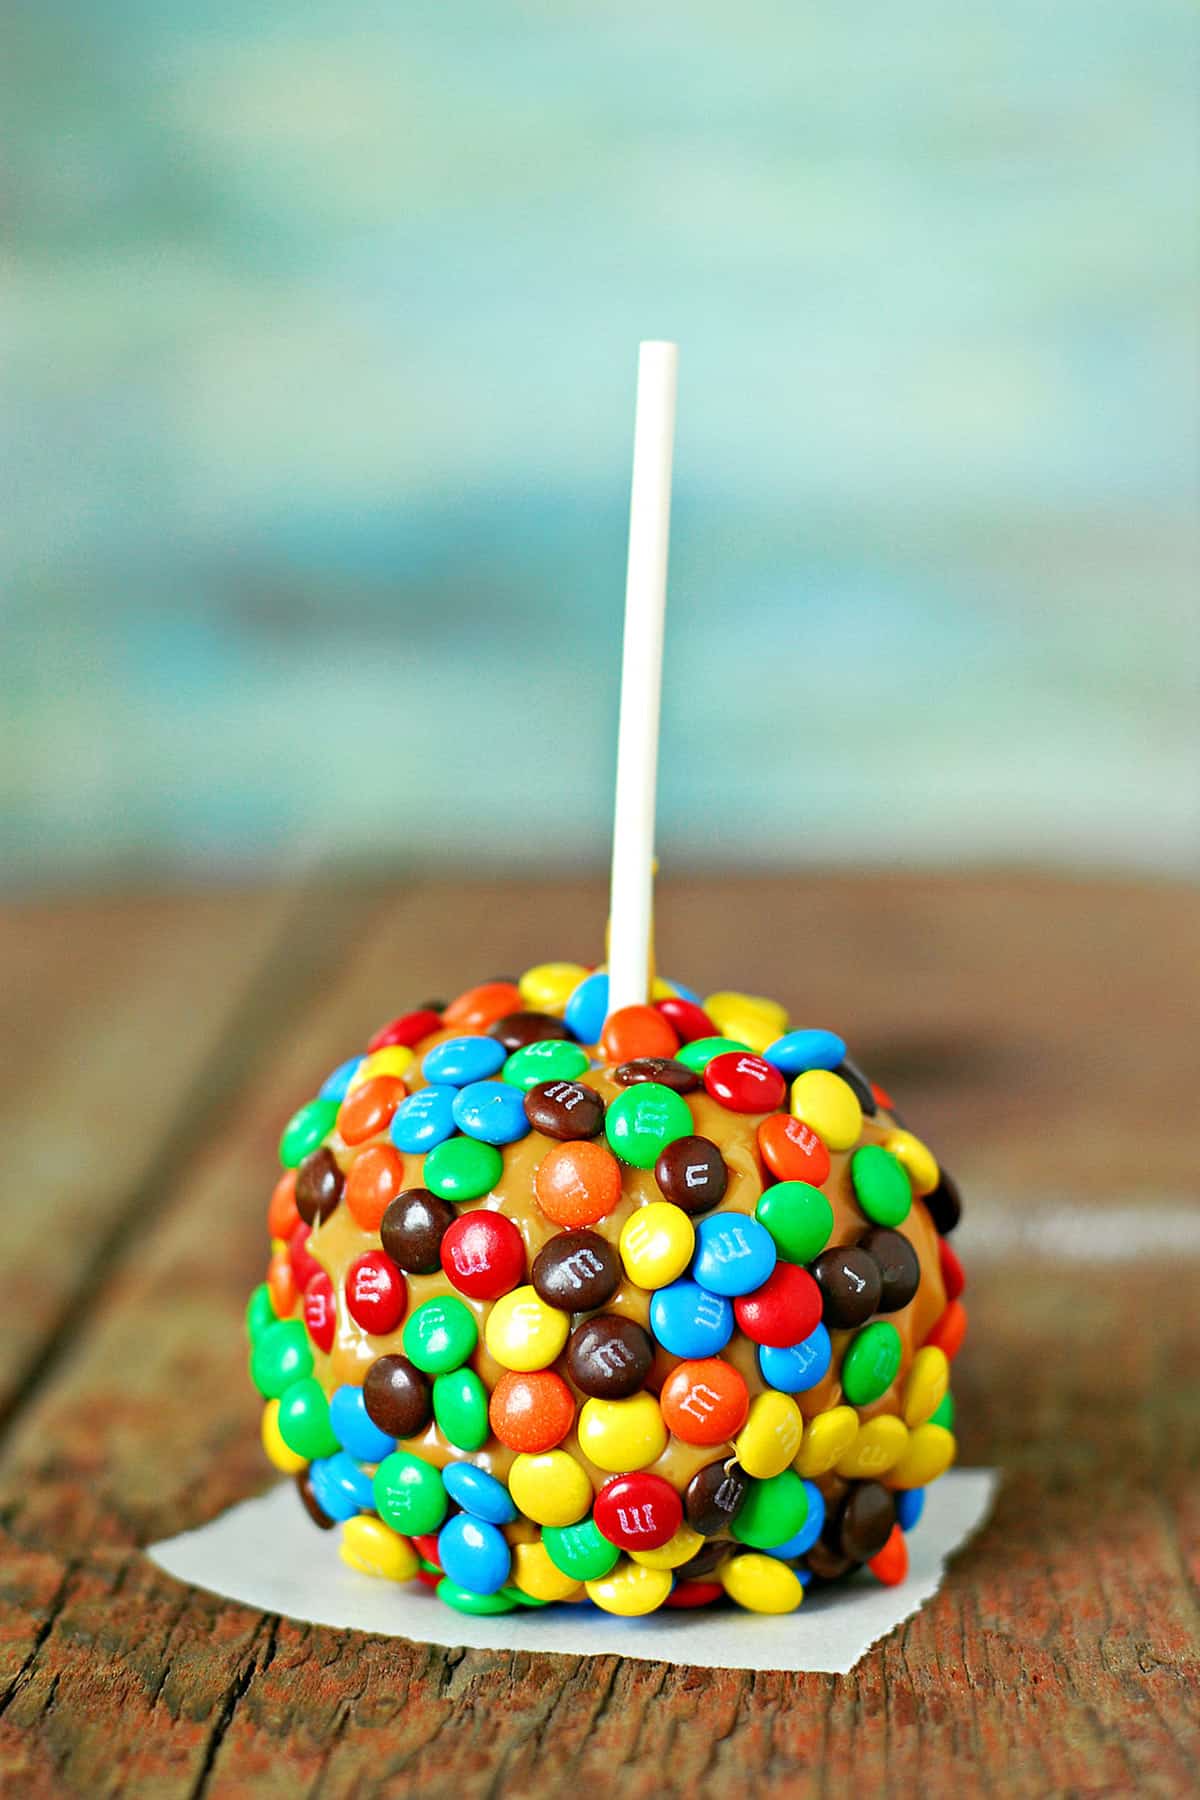 A caramel apple with M&Ms candy covering it.